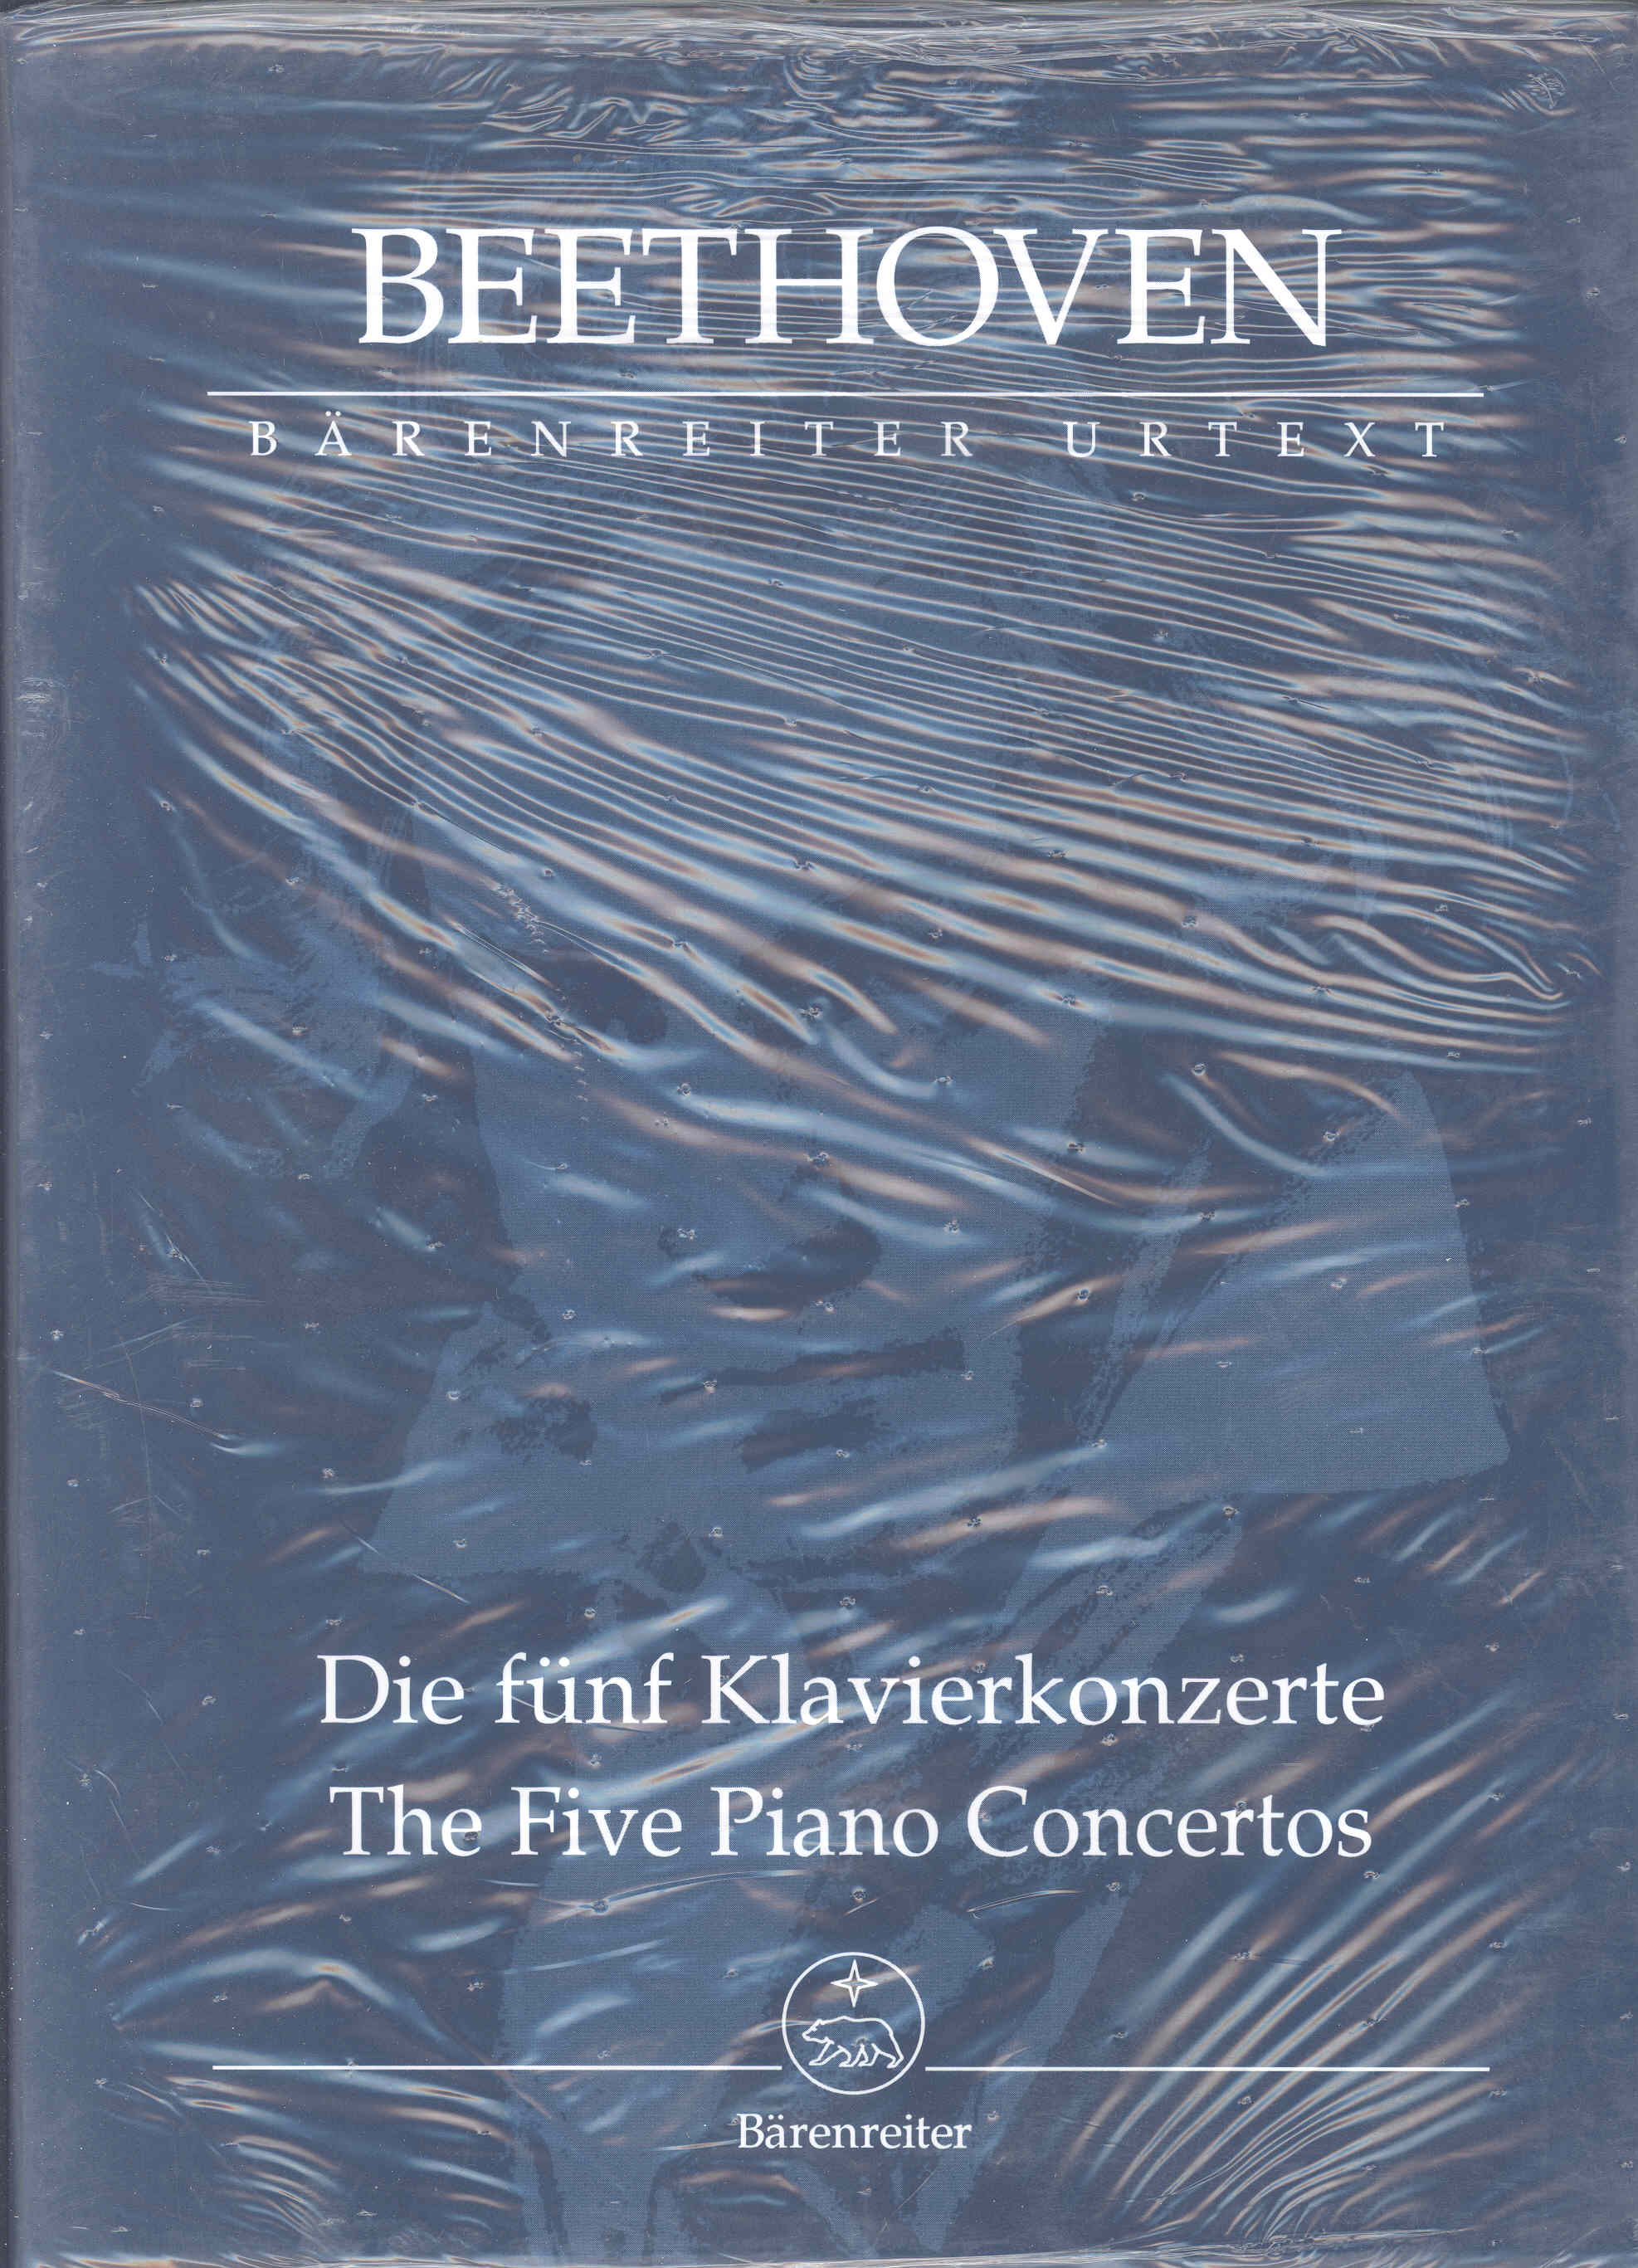 Beethoven Concertos For Piano Complete 5 Vol Study Sheet Music Songbook